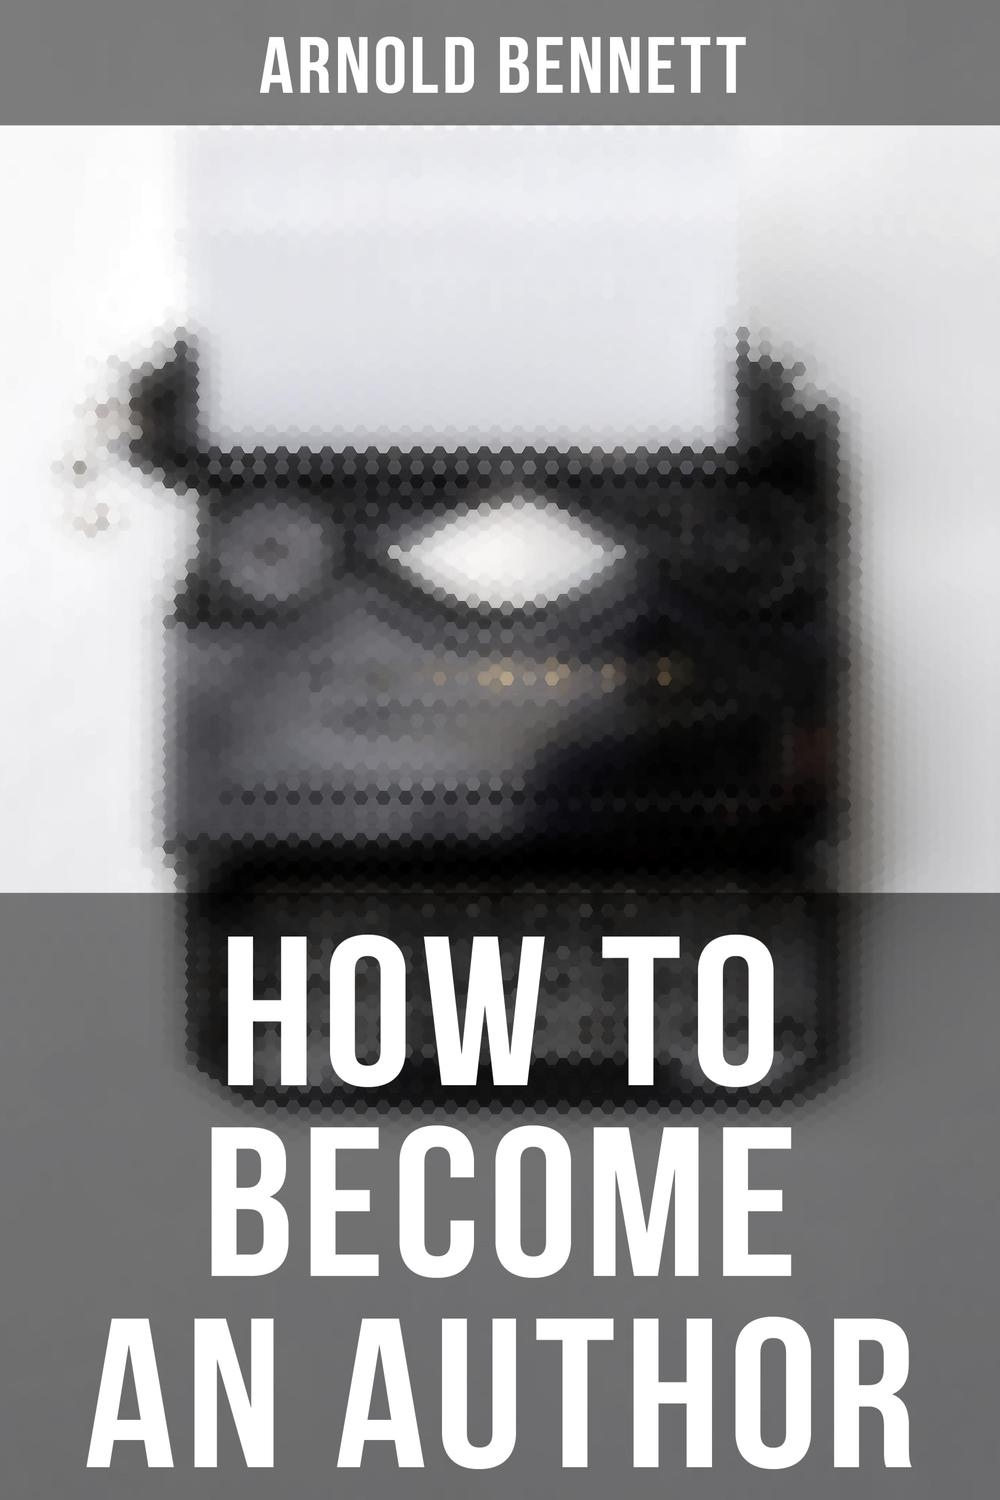 How to Become an Author - Arnold Bennett